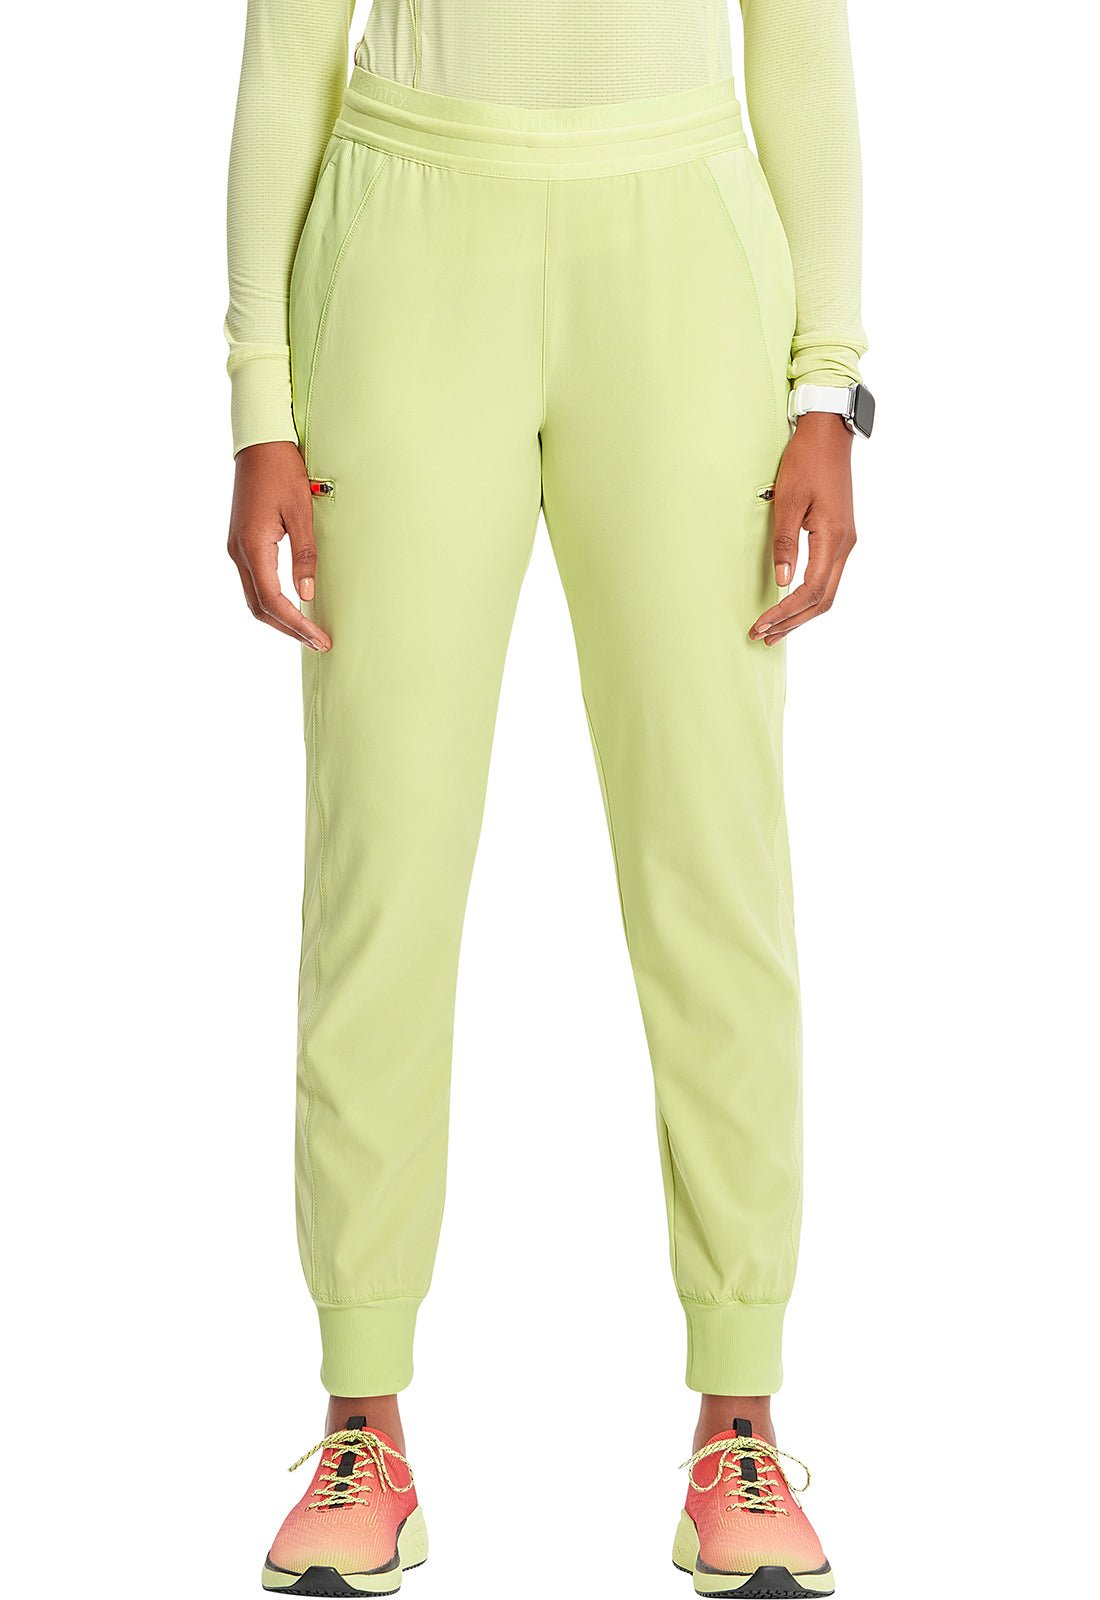 http://www.scrubsselect.com/cdn/shop/products/cherokee-infinity-gnr8-jogger-pant-in122a-in-electric-coral-green-energy-196009.jpg?v=1709476891